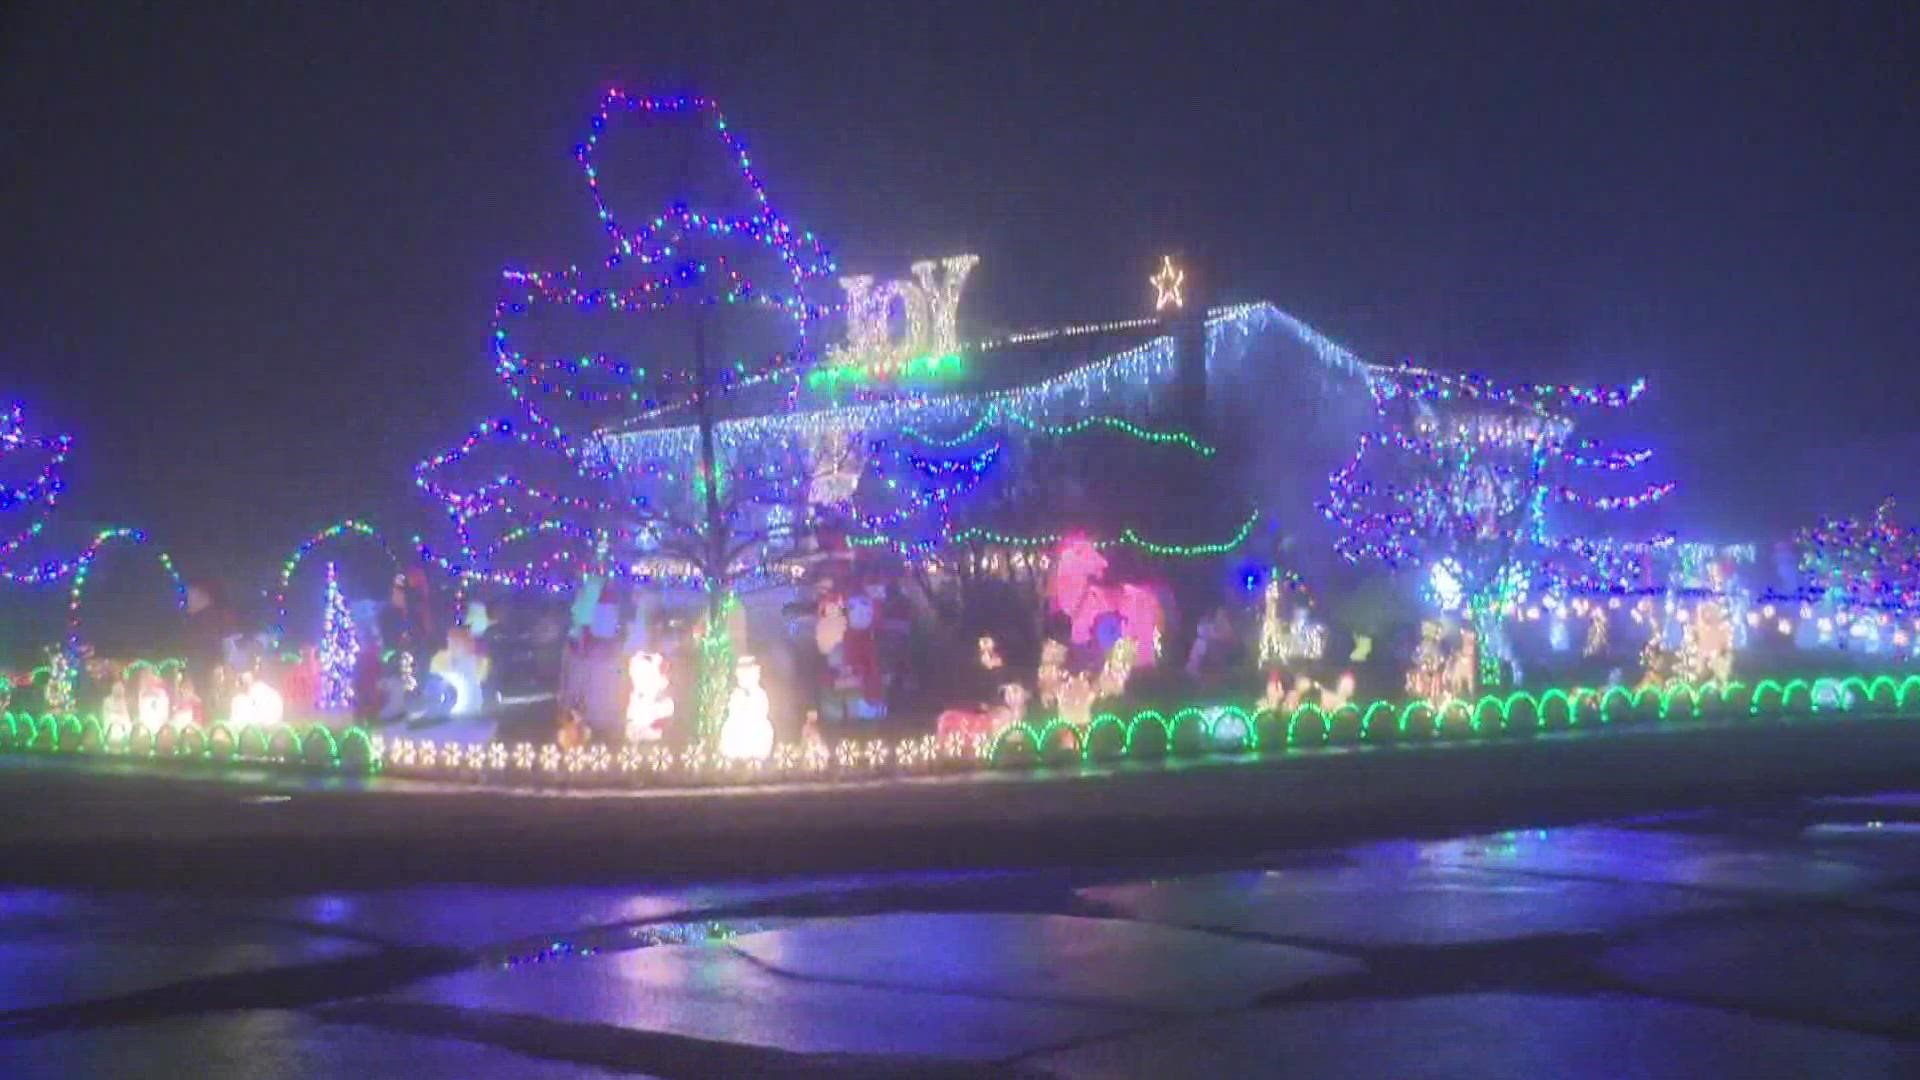 Wow! Check out this incredible Christmas display in the 300 block of Crestway Oval in Brunswick.